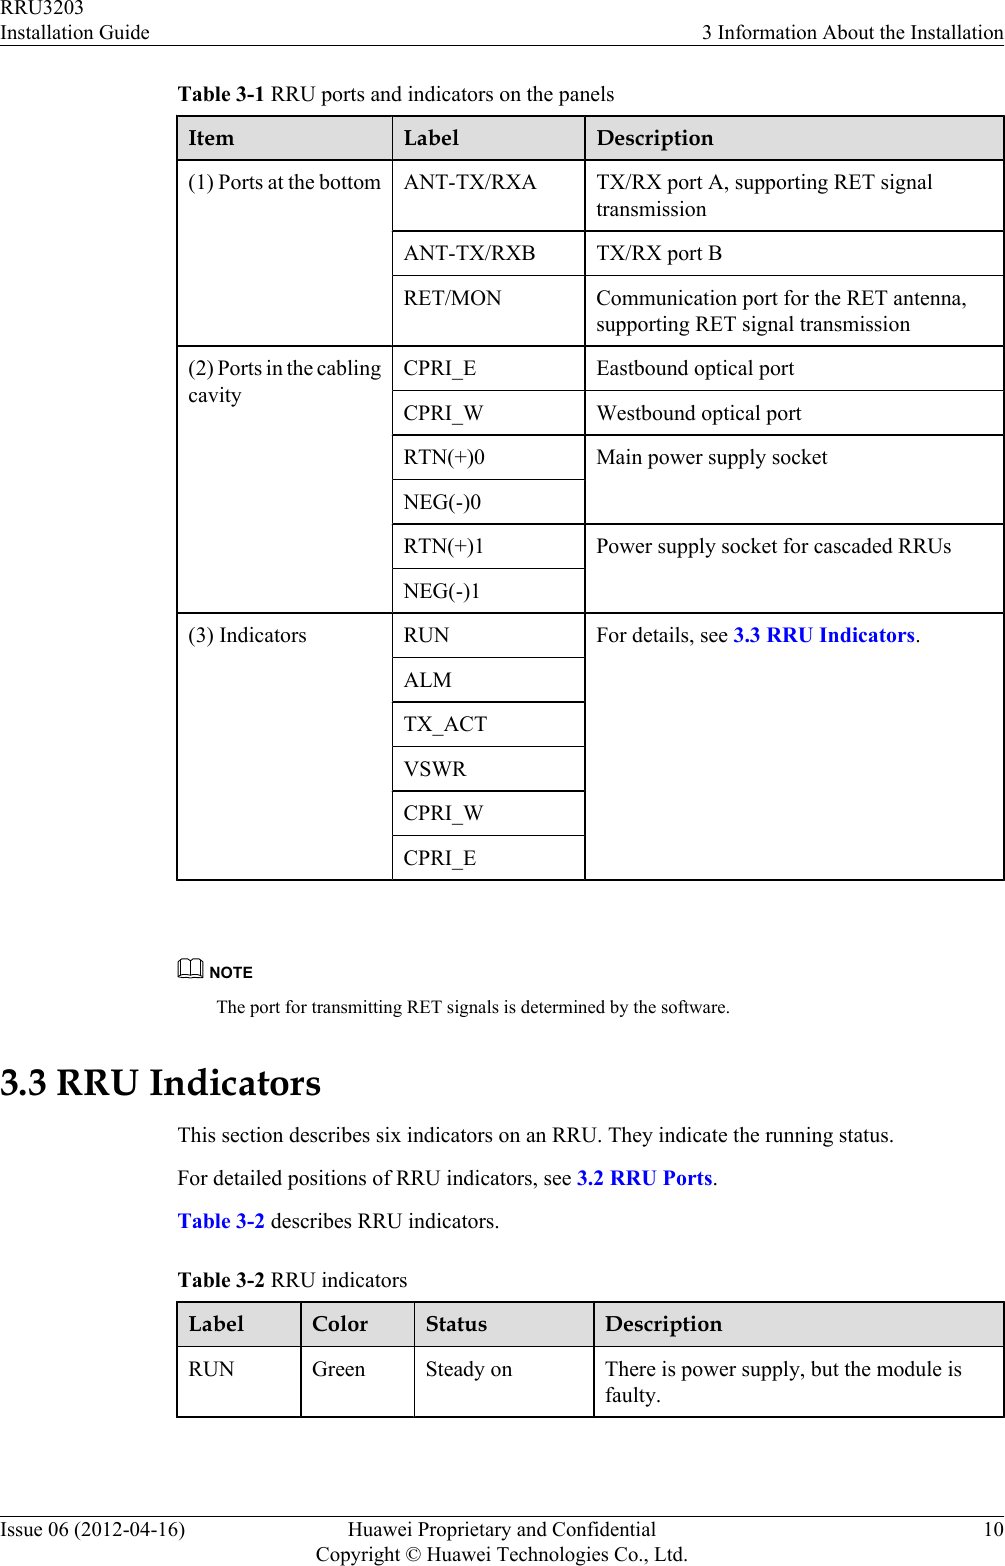 Table 3-1 RRU ports and indicators on the panelsItem Label Description(1) Ports at the bottom ANT-TX/RXA TX/RX port A, supporting RET signaltransmissionANT-TX/RXB TX/RX port BRET/MON Communication port for the RET antenna,supporting RET signal transmission(2) Ports in the cablingcavityCPRI_E Eastbound optical portCPRI_W Westbound optical portRTN(+)0 Main power supply socketNEG(-)0RTN(+)1 Power supply socket for cascaded RRUsNEG(-)1(3) Indicators RUN For details, see 3.3 RRU Indicators.ALMTX_ACTVSWRCPRI_WCPRI_E NOTEThe port for transmitting RET signals is determined by the software.3.3 RRU IndicatorsThis section describes six indicators on an RRU. They indicate the running status.For detailed positions of RRU indicators, see 3.2 RRU Ports.Table 3-2 describes RRU indicators.Table 3-2 RRU indicatorsLabel Color Status DescriptionRUN Green Steady on There is power supply, but the module isfaulty.RRU3203Installation Guide 3 Information About the InstallationIssue 06 (2012-04-16) Huawei Proprietary and ConfidentialCopyright © Huawei Technologies Co., Ltd.10